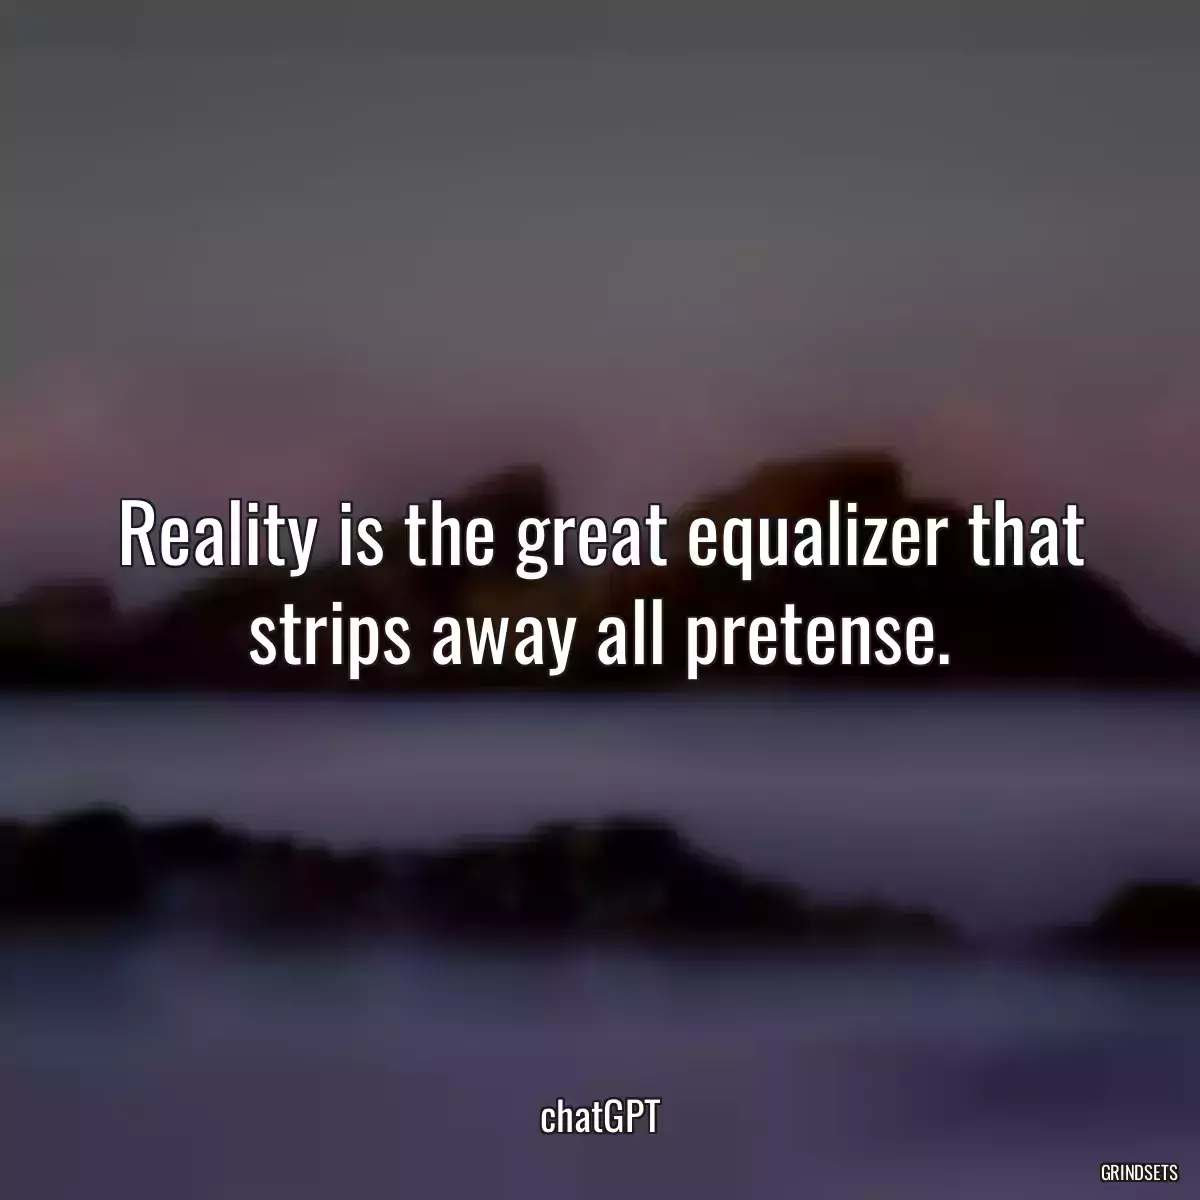 Reality is the great equalizer that strips away all pretense.